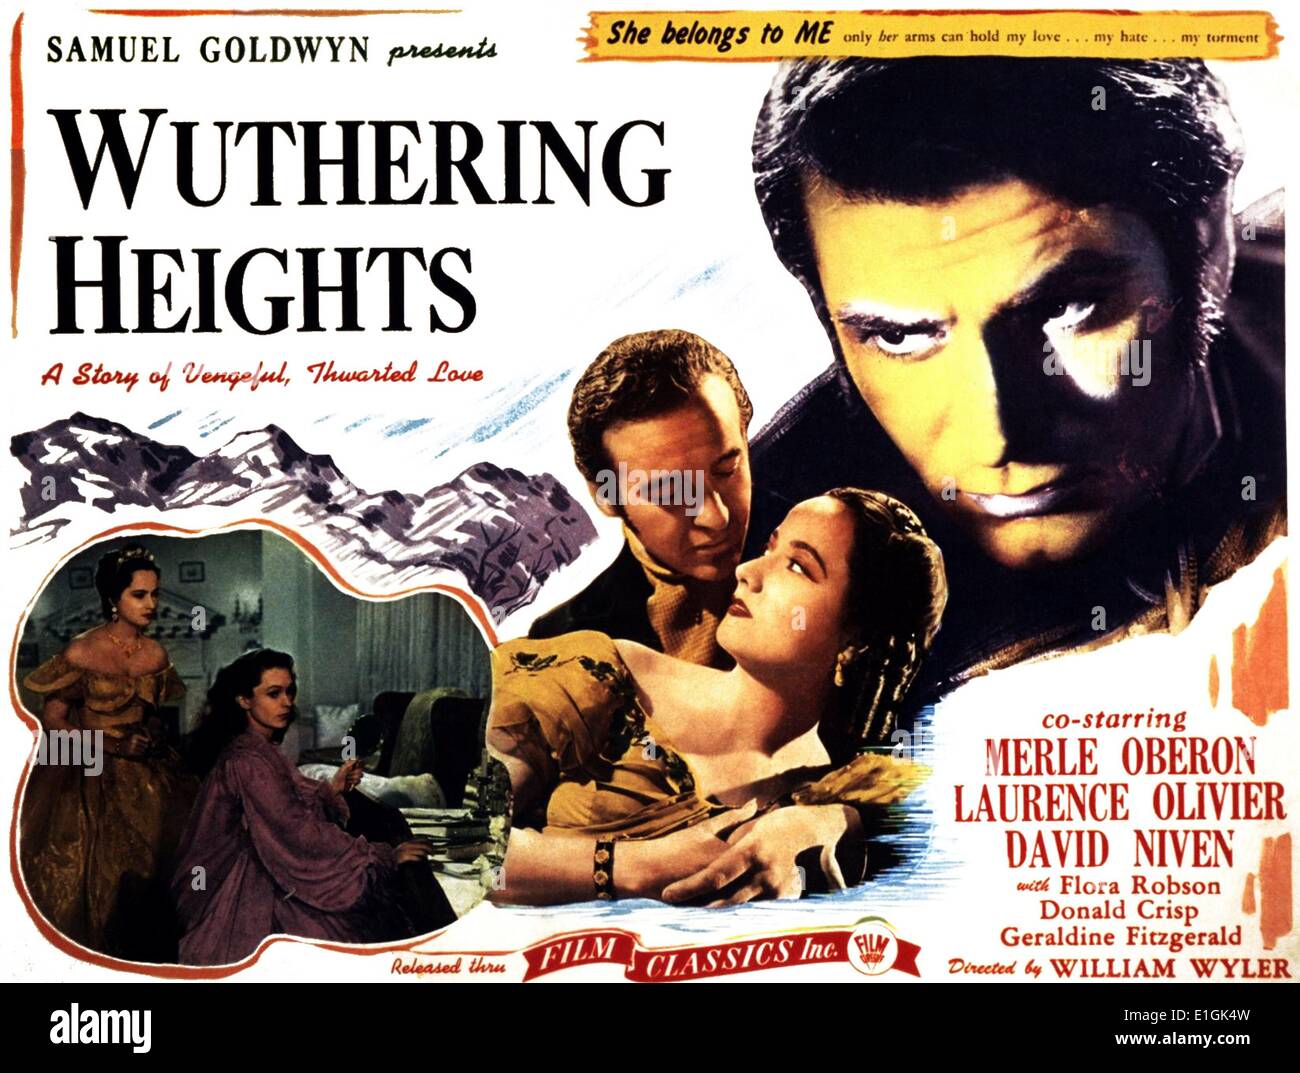 Wuthering Heights starring Merle Oberon, Laurence Olivier e David Niven un 1939 American pellicola in bianco e nero. Foto Stock